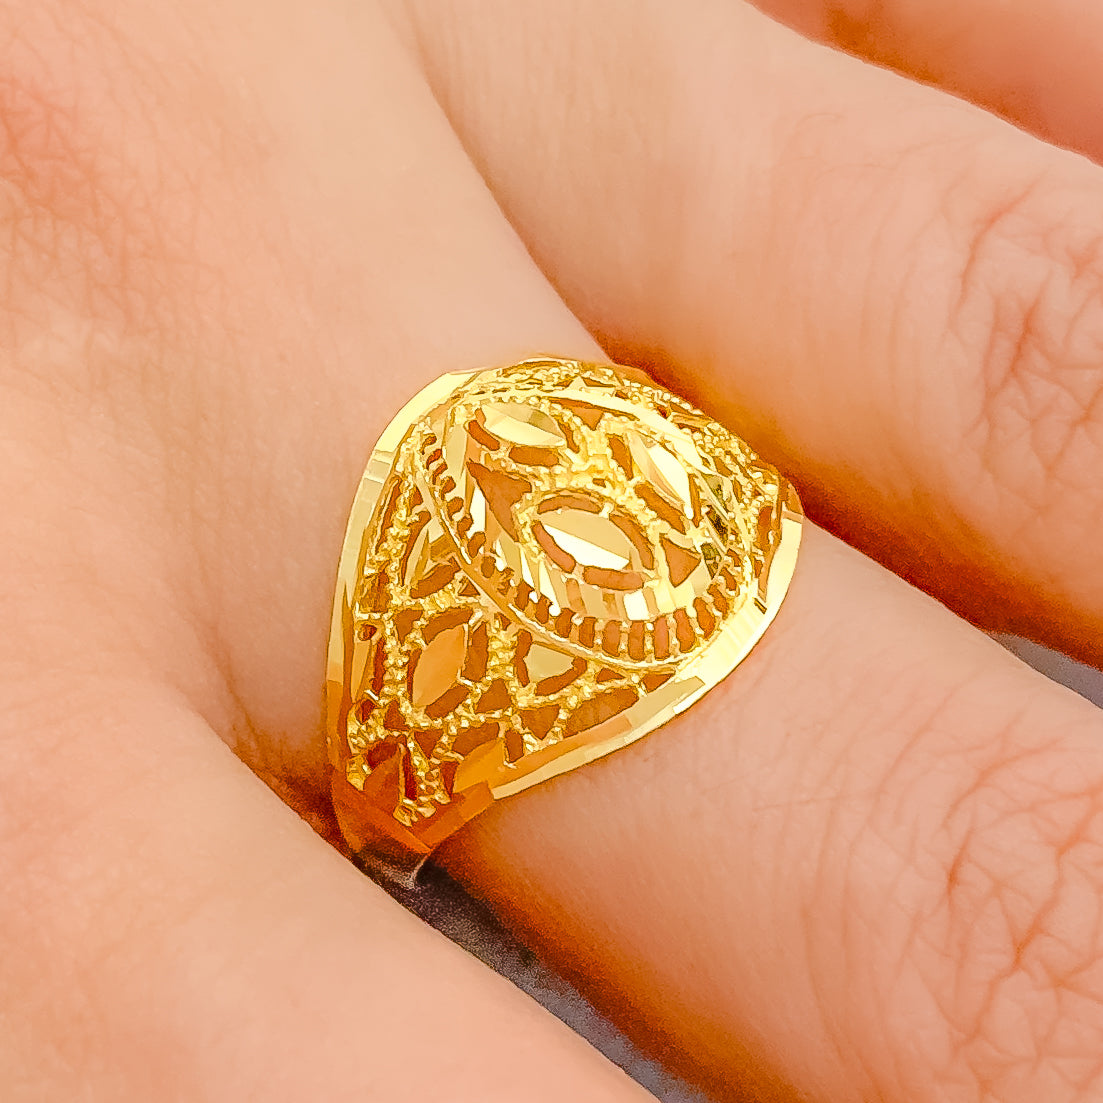 Buy quality 22k gold single stone couple ring in Ahmedabad